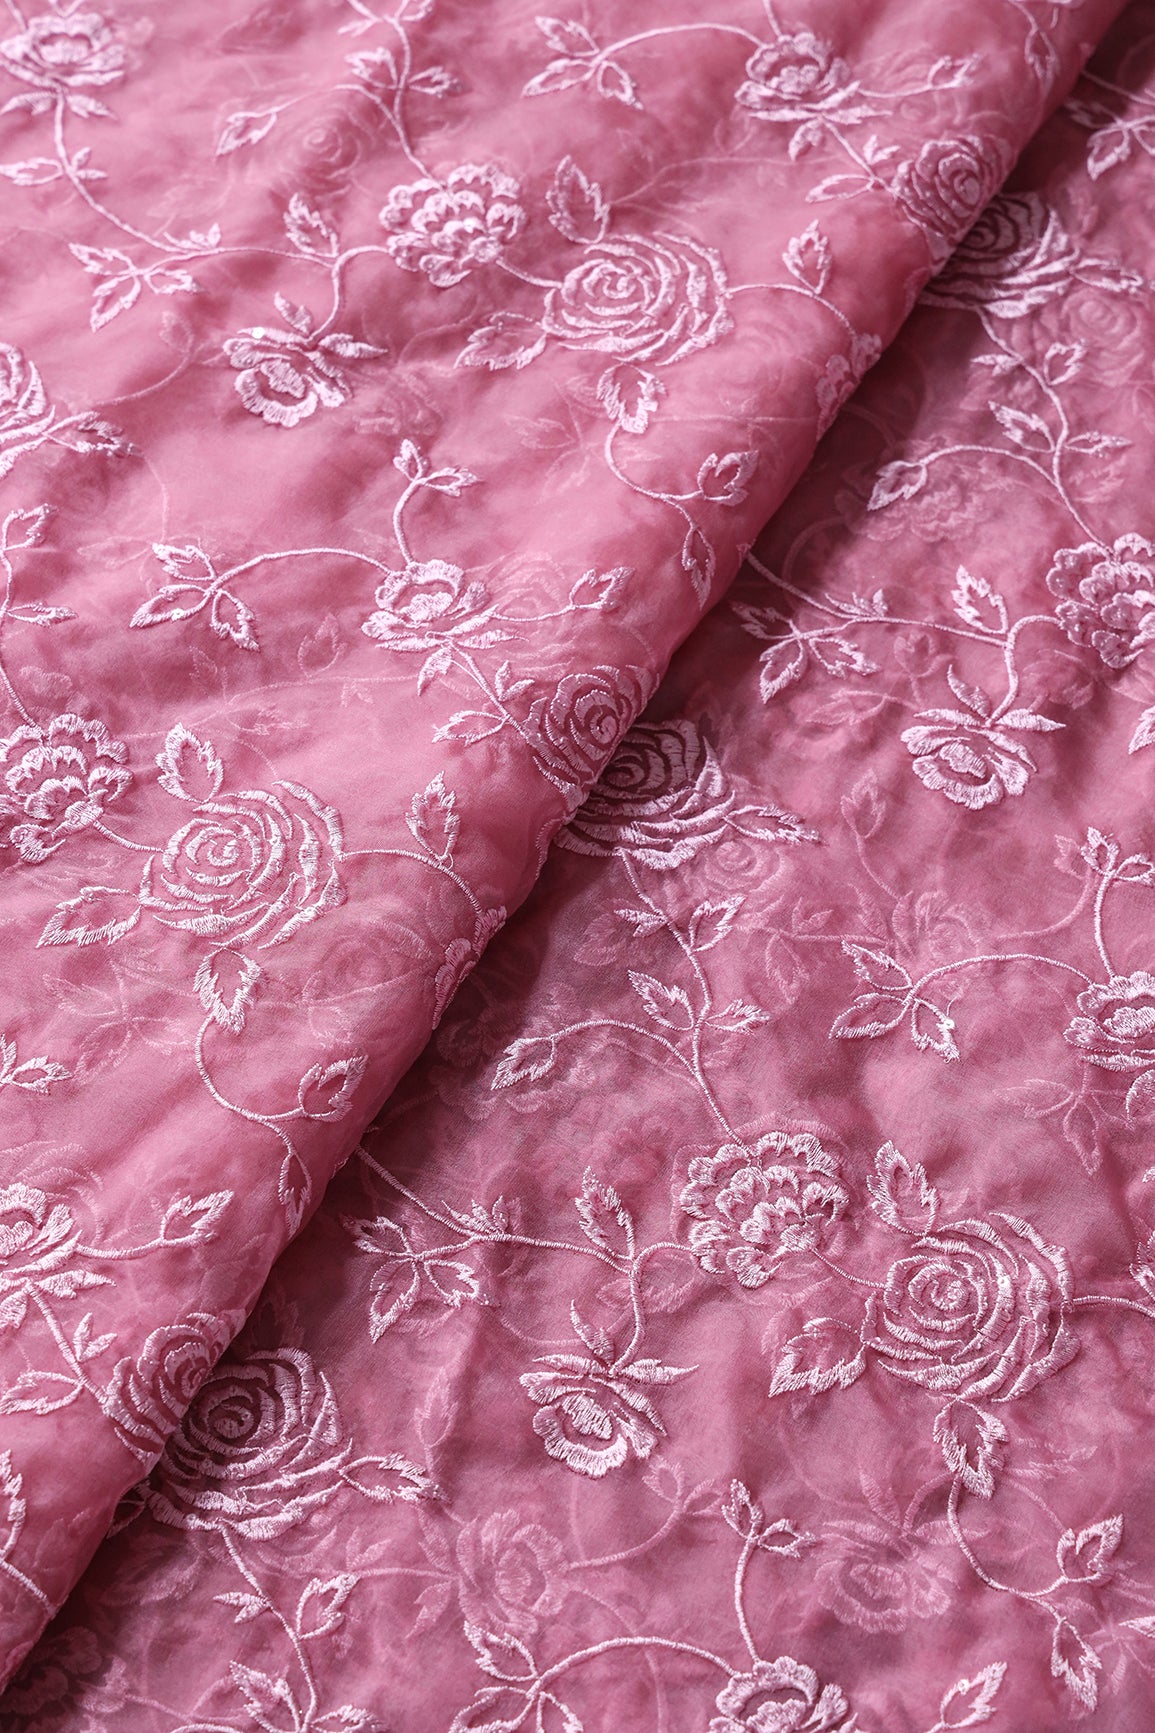 Beautiful Water Sequins With Thread Floral Embroidery On Pink Organza Fabric